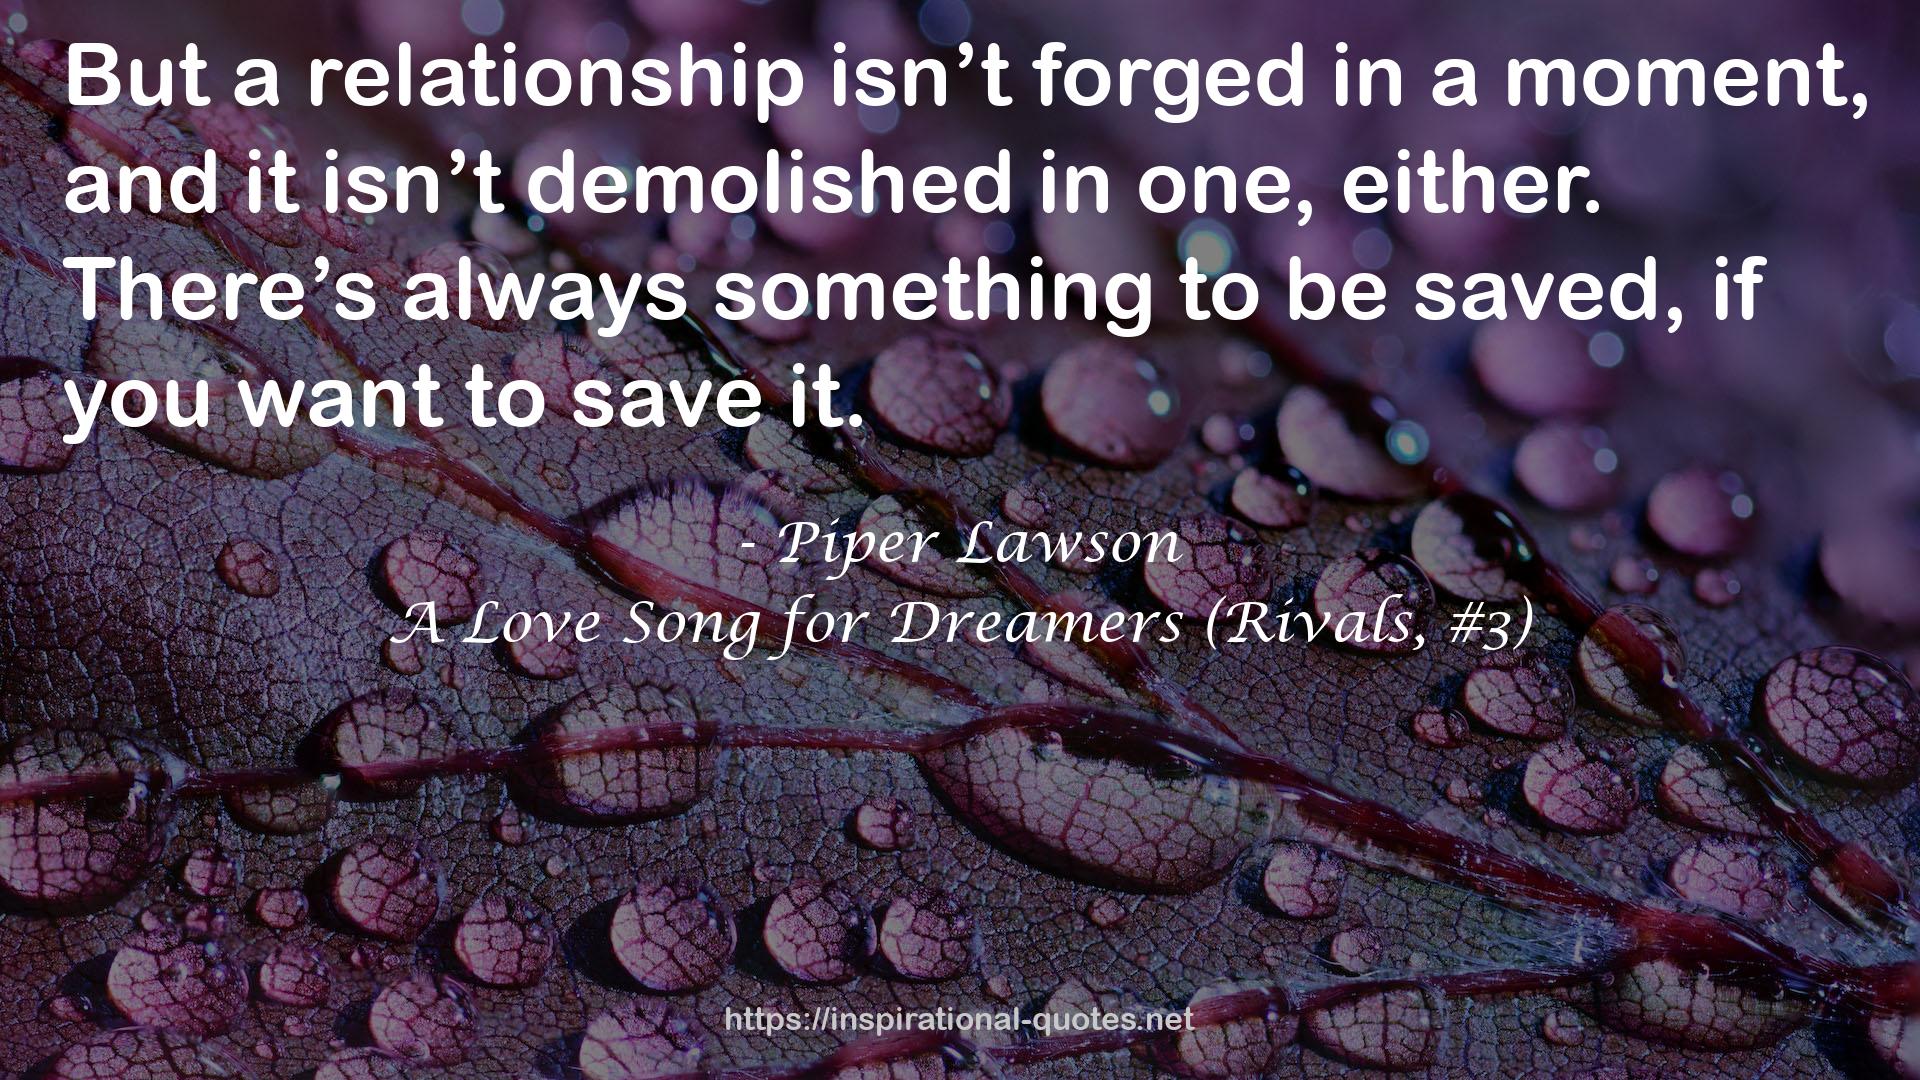 A Love Song for Dreamers (Rivals, #3) QUOTES